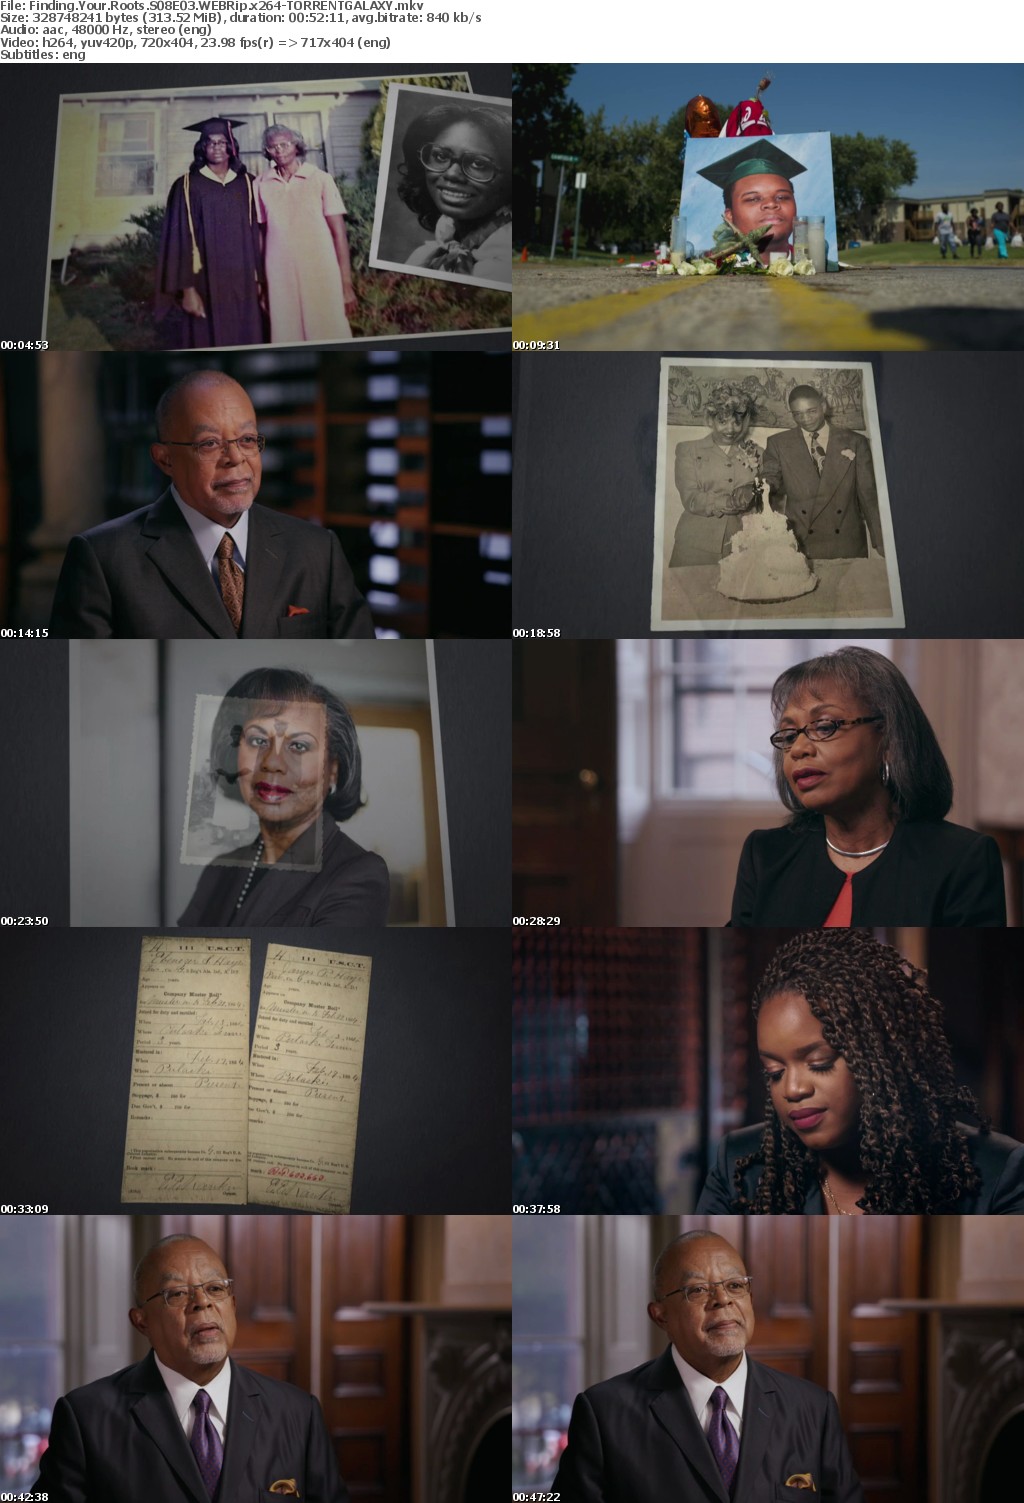 Finding Your Roots S08E03 WEBRip x264-GALAXY